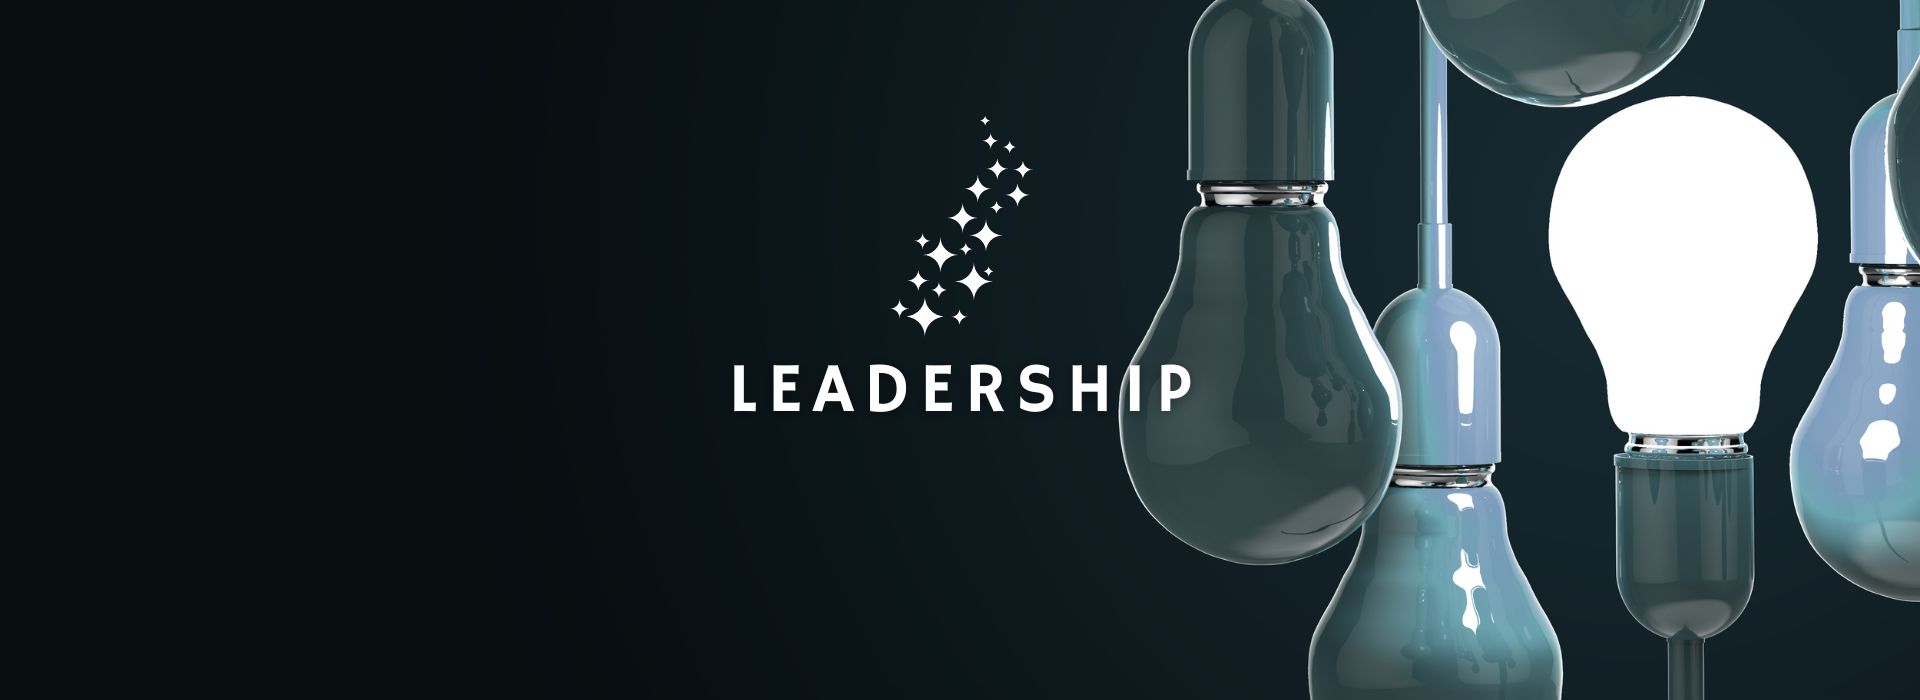 light bulbs with one lit up representing embodied leadership